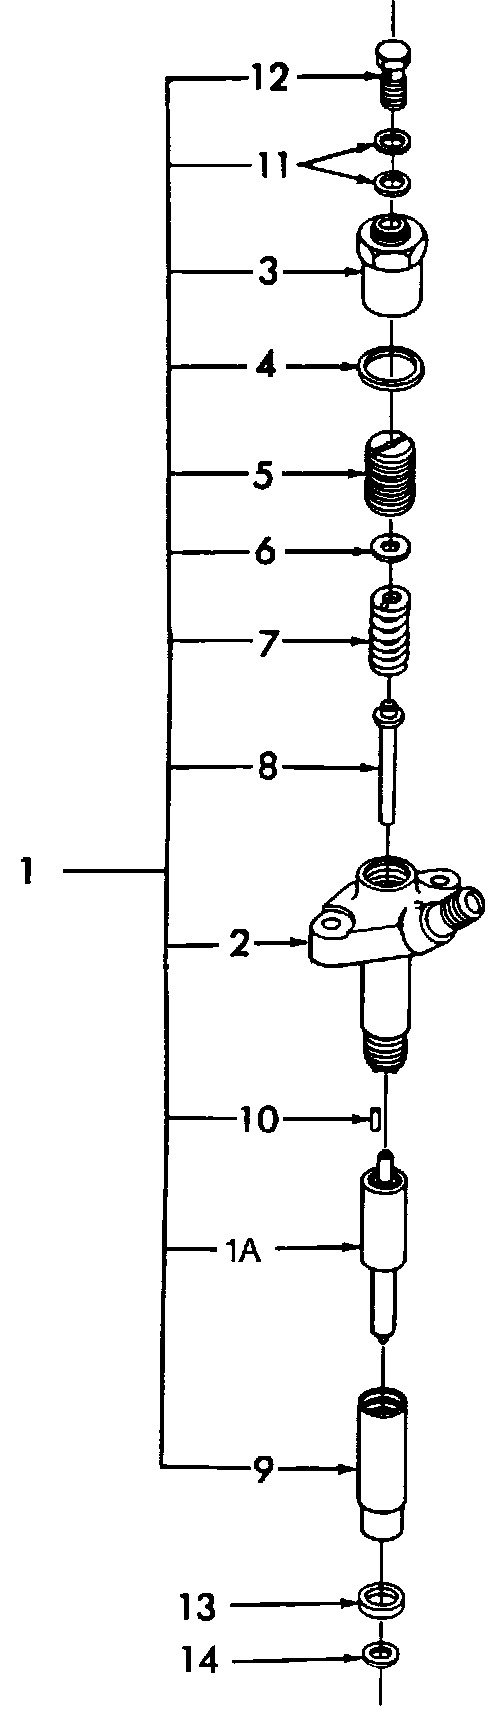 09D01 FUEL INJECTOR ASSEMBLY